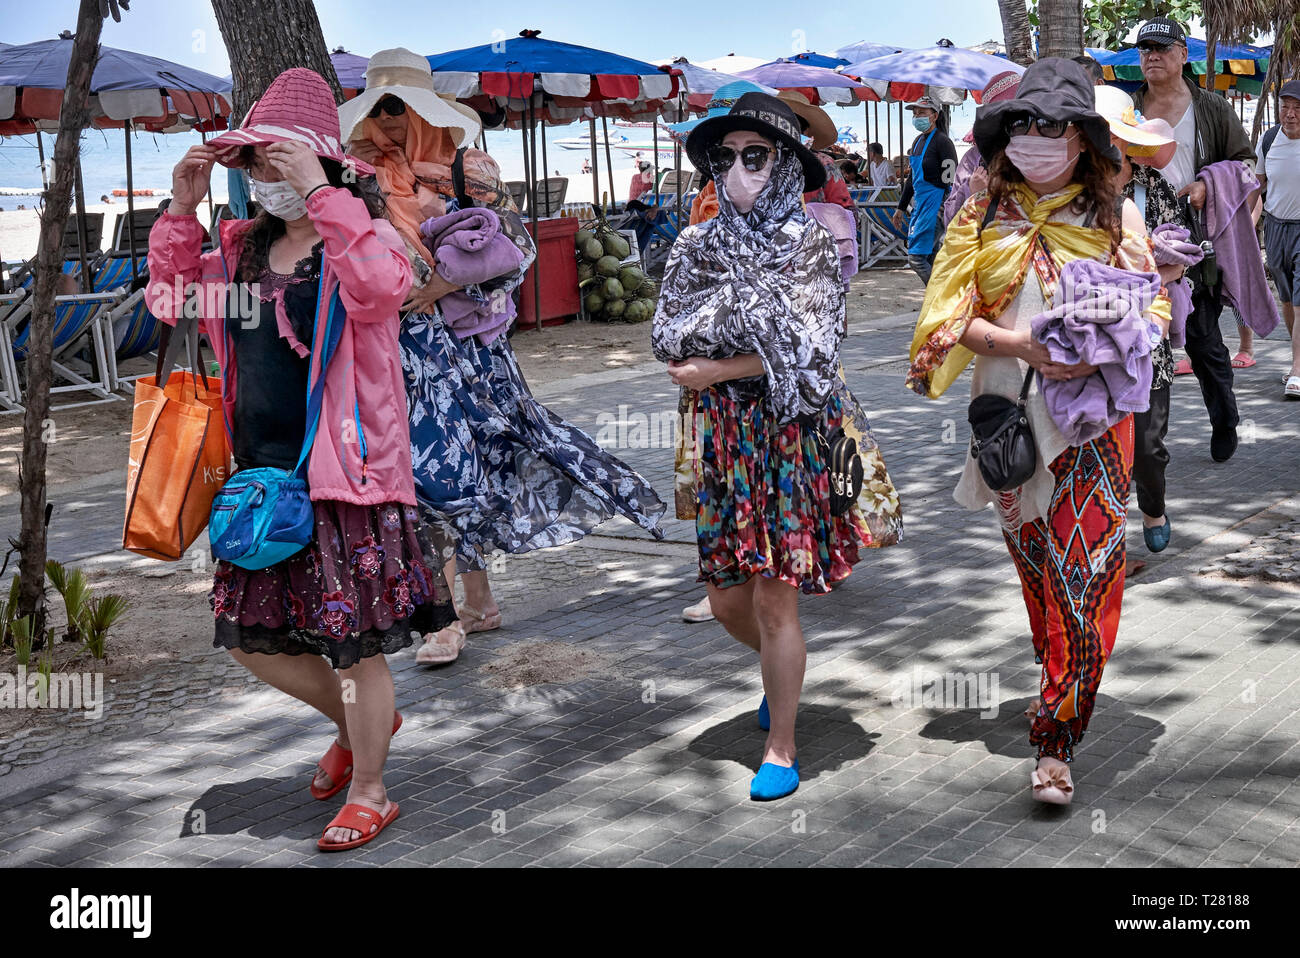 Face masks. Women wearing face masks, shawls and hats to protect against the hot sun. Pattaya, Thailand, Southeast Asia Stock Photo